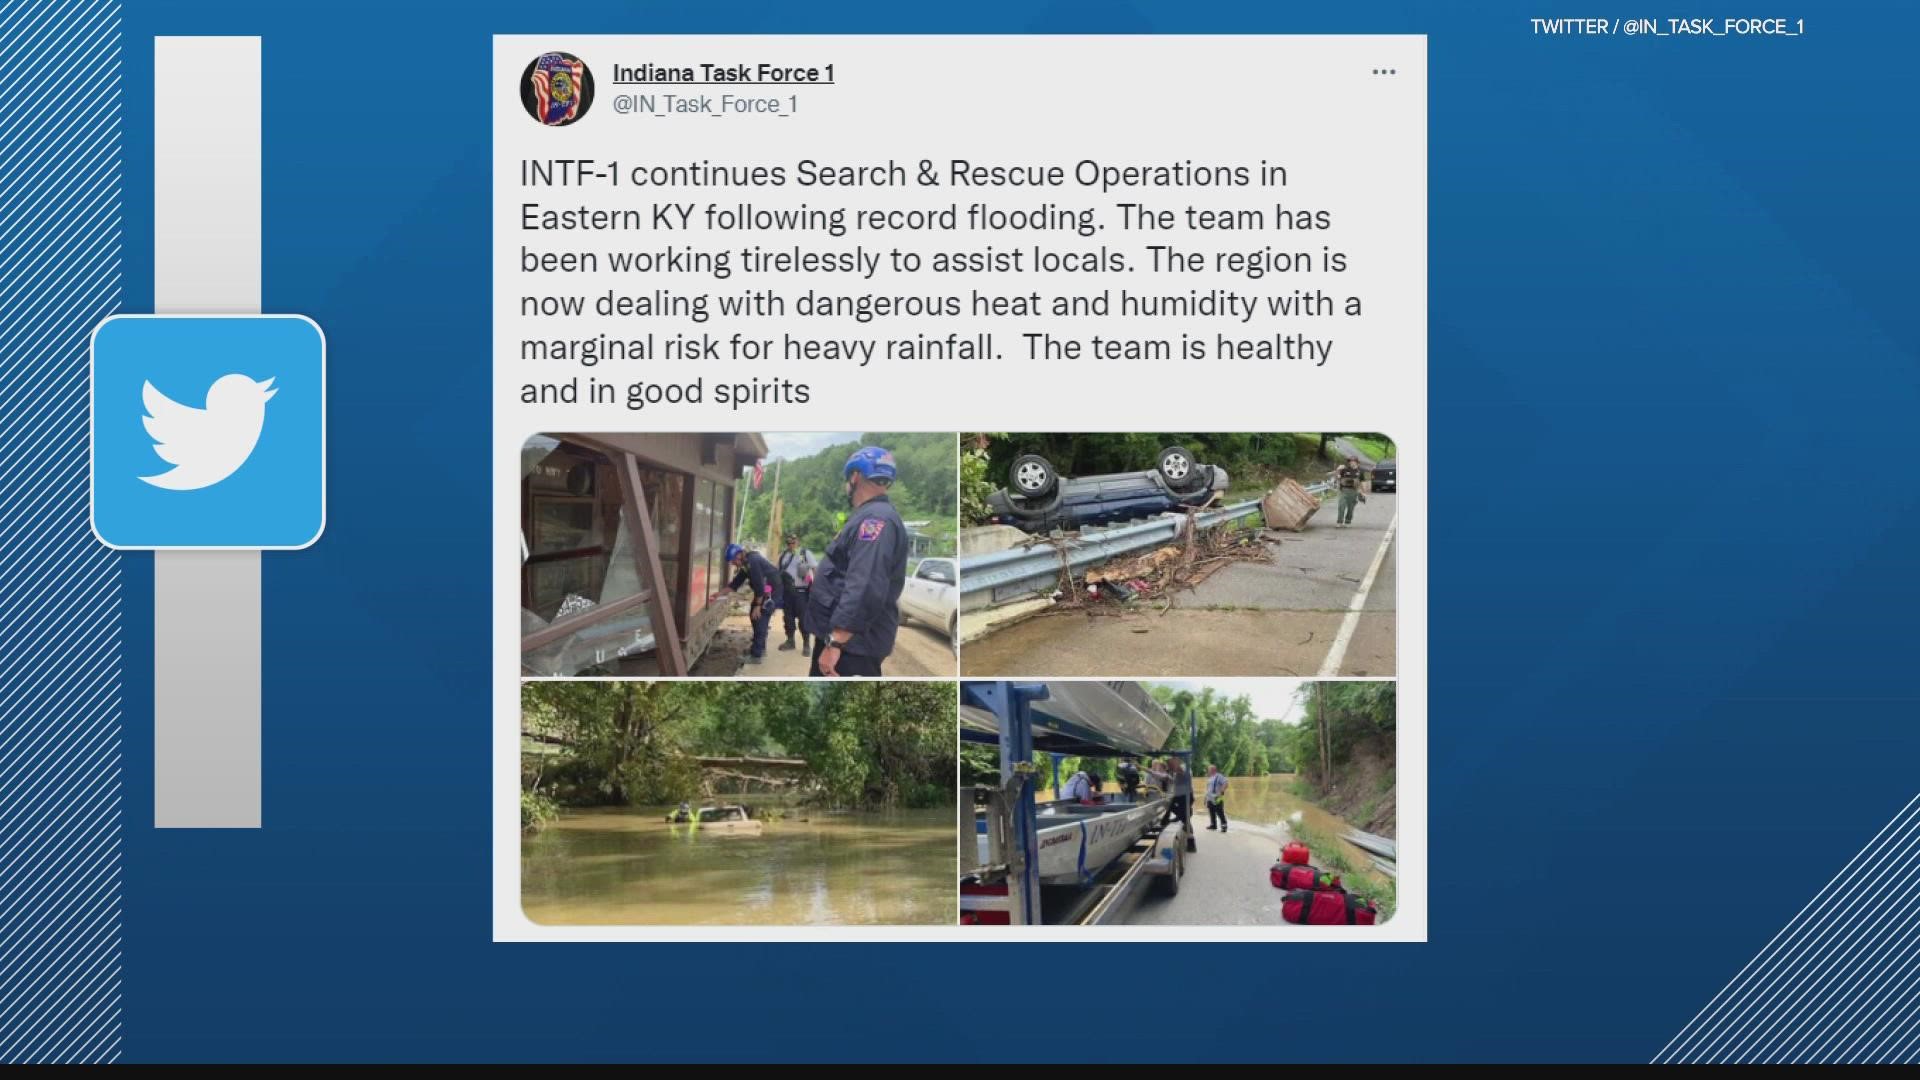 Indiana Task Force 1 is standing by in eastern Kentucky as more rain is expected in areas already hit hard by massive flooding.